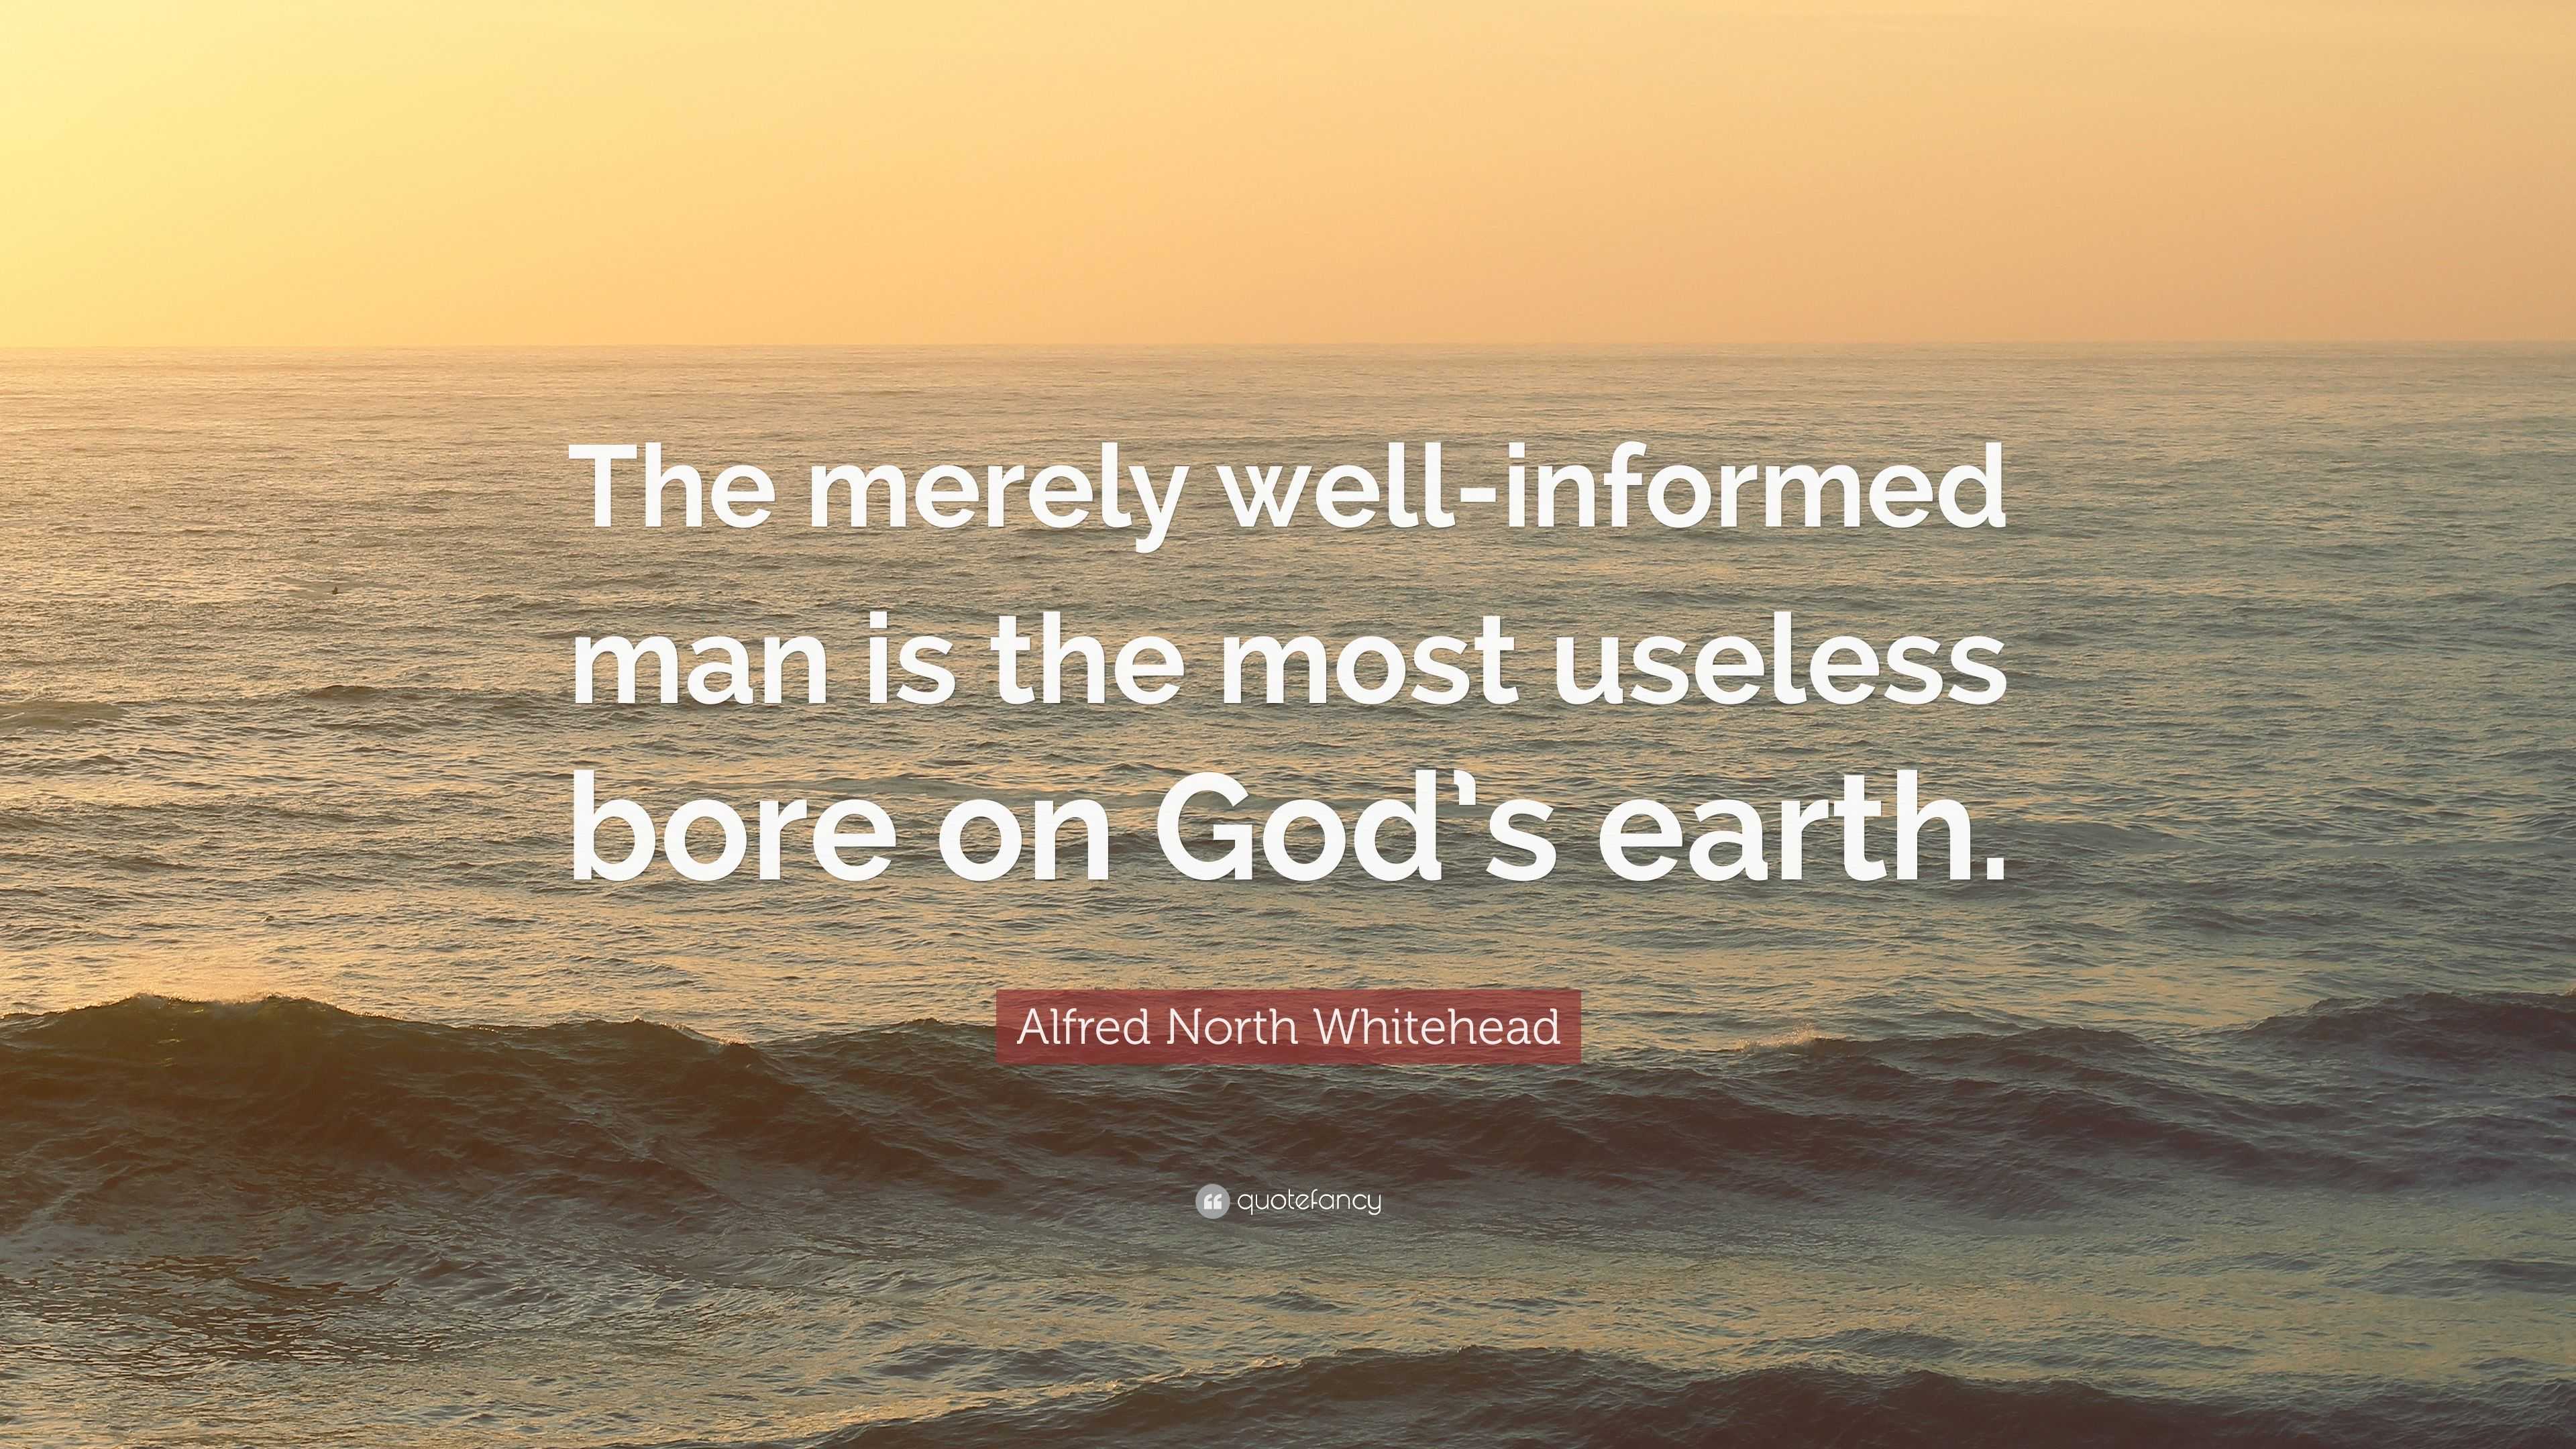 alfred north whitehead believed in god